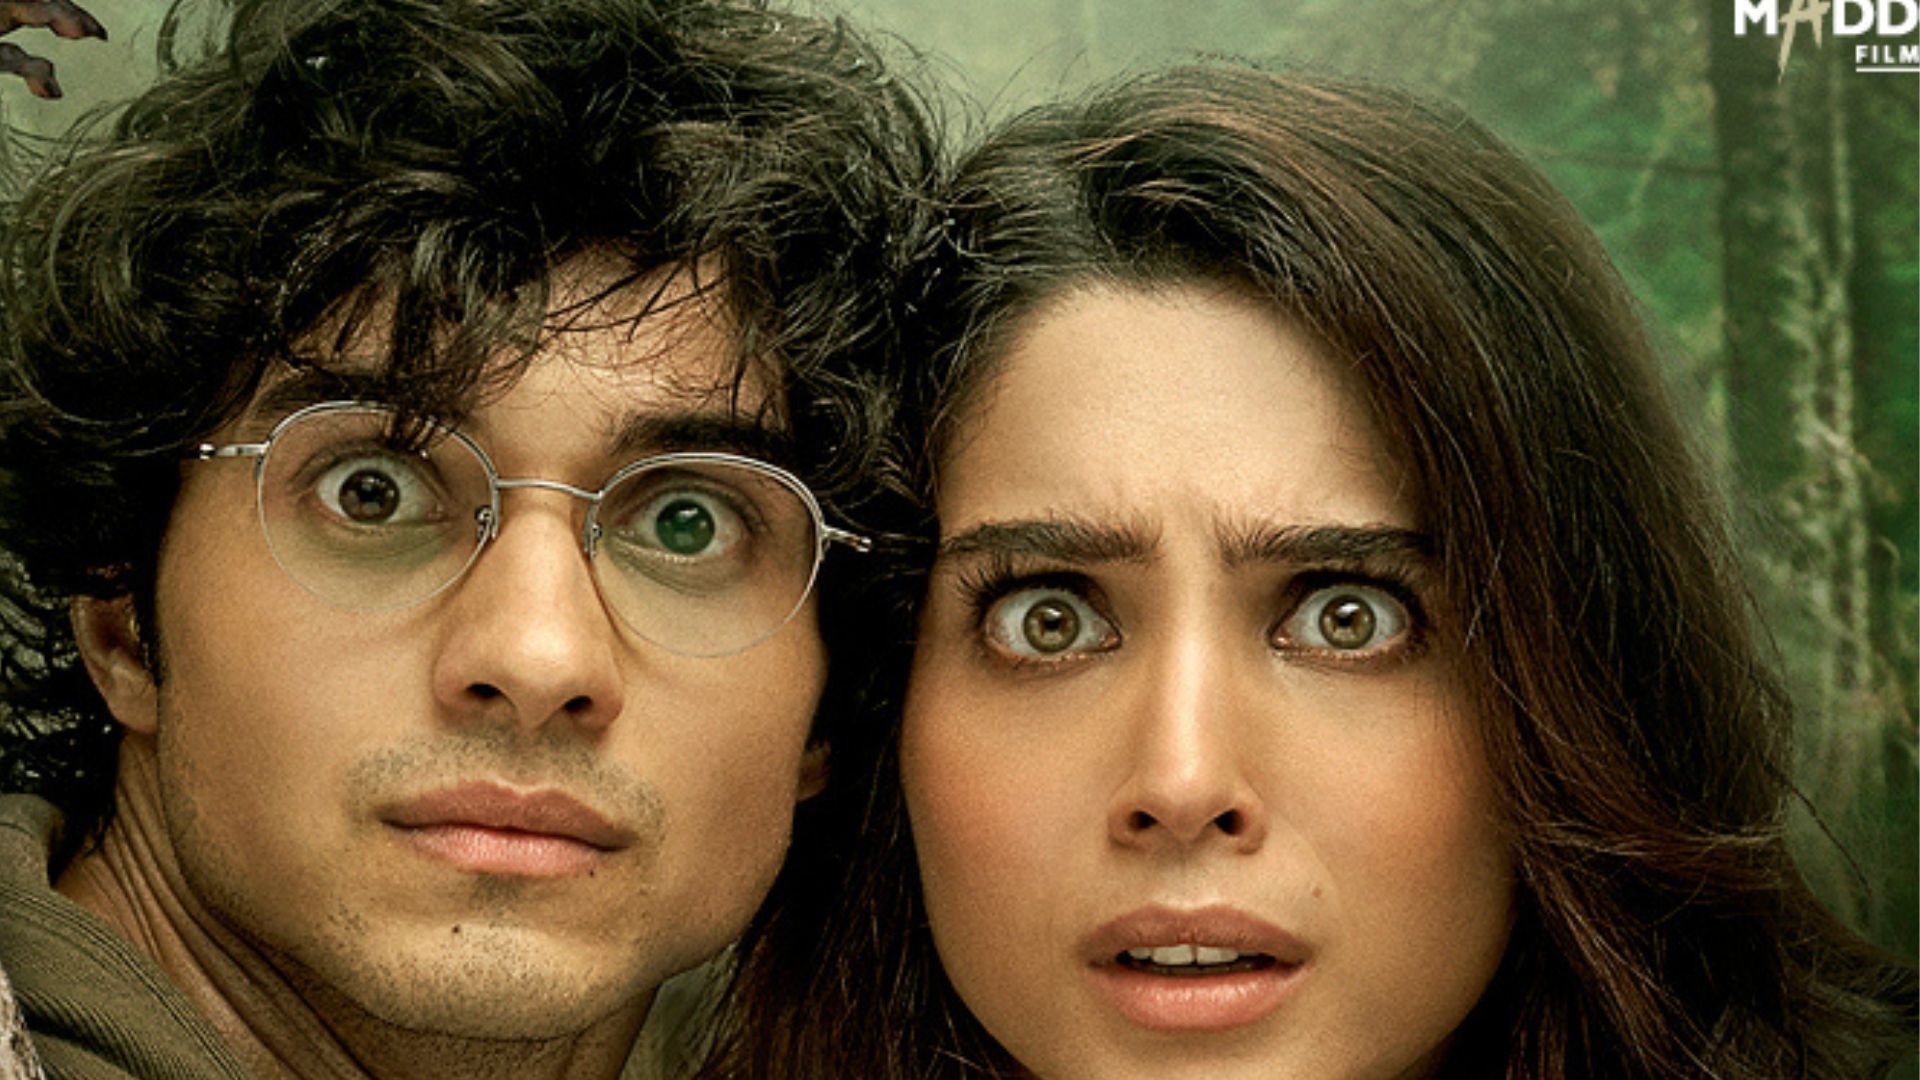 Munjya Review: Munjya is an unexpectedly excellent horror comedy movie.